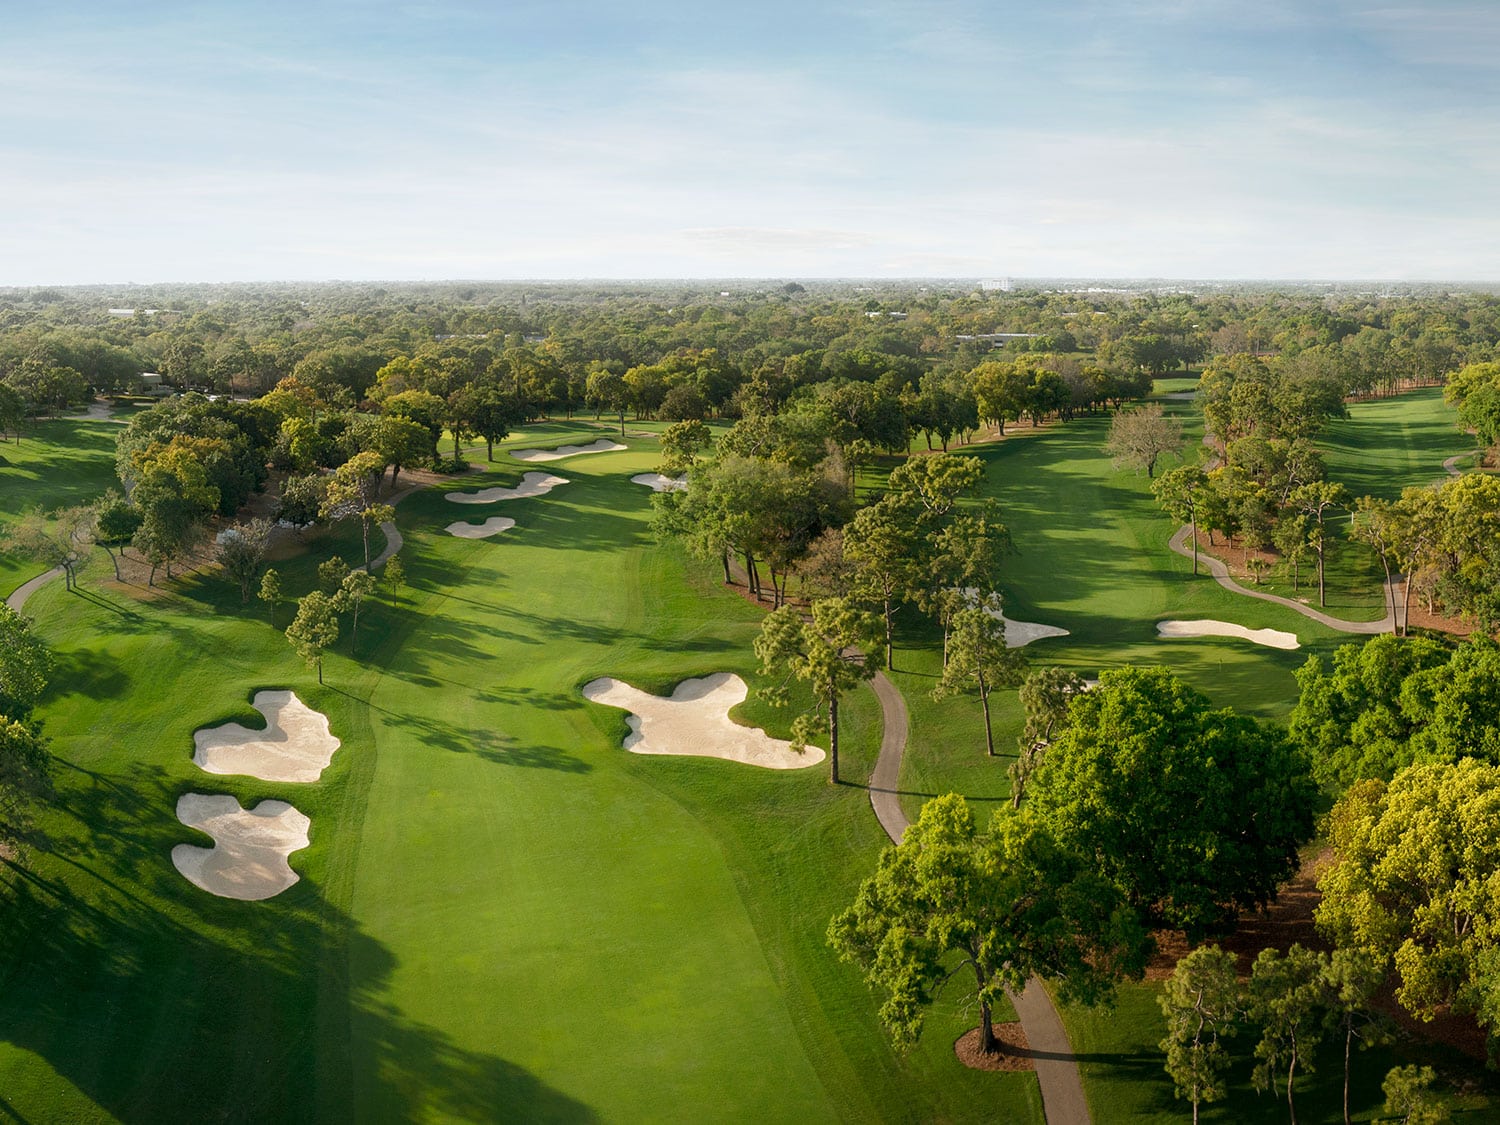 An aerial view of the Copperhead Course at Innisbrook Golf Resort in Palm Harbor, Florida.